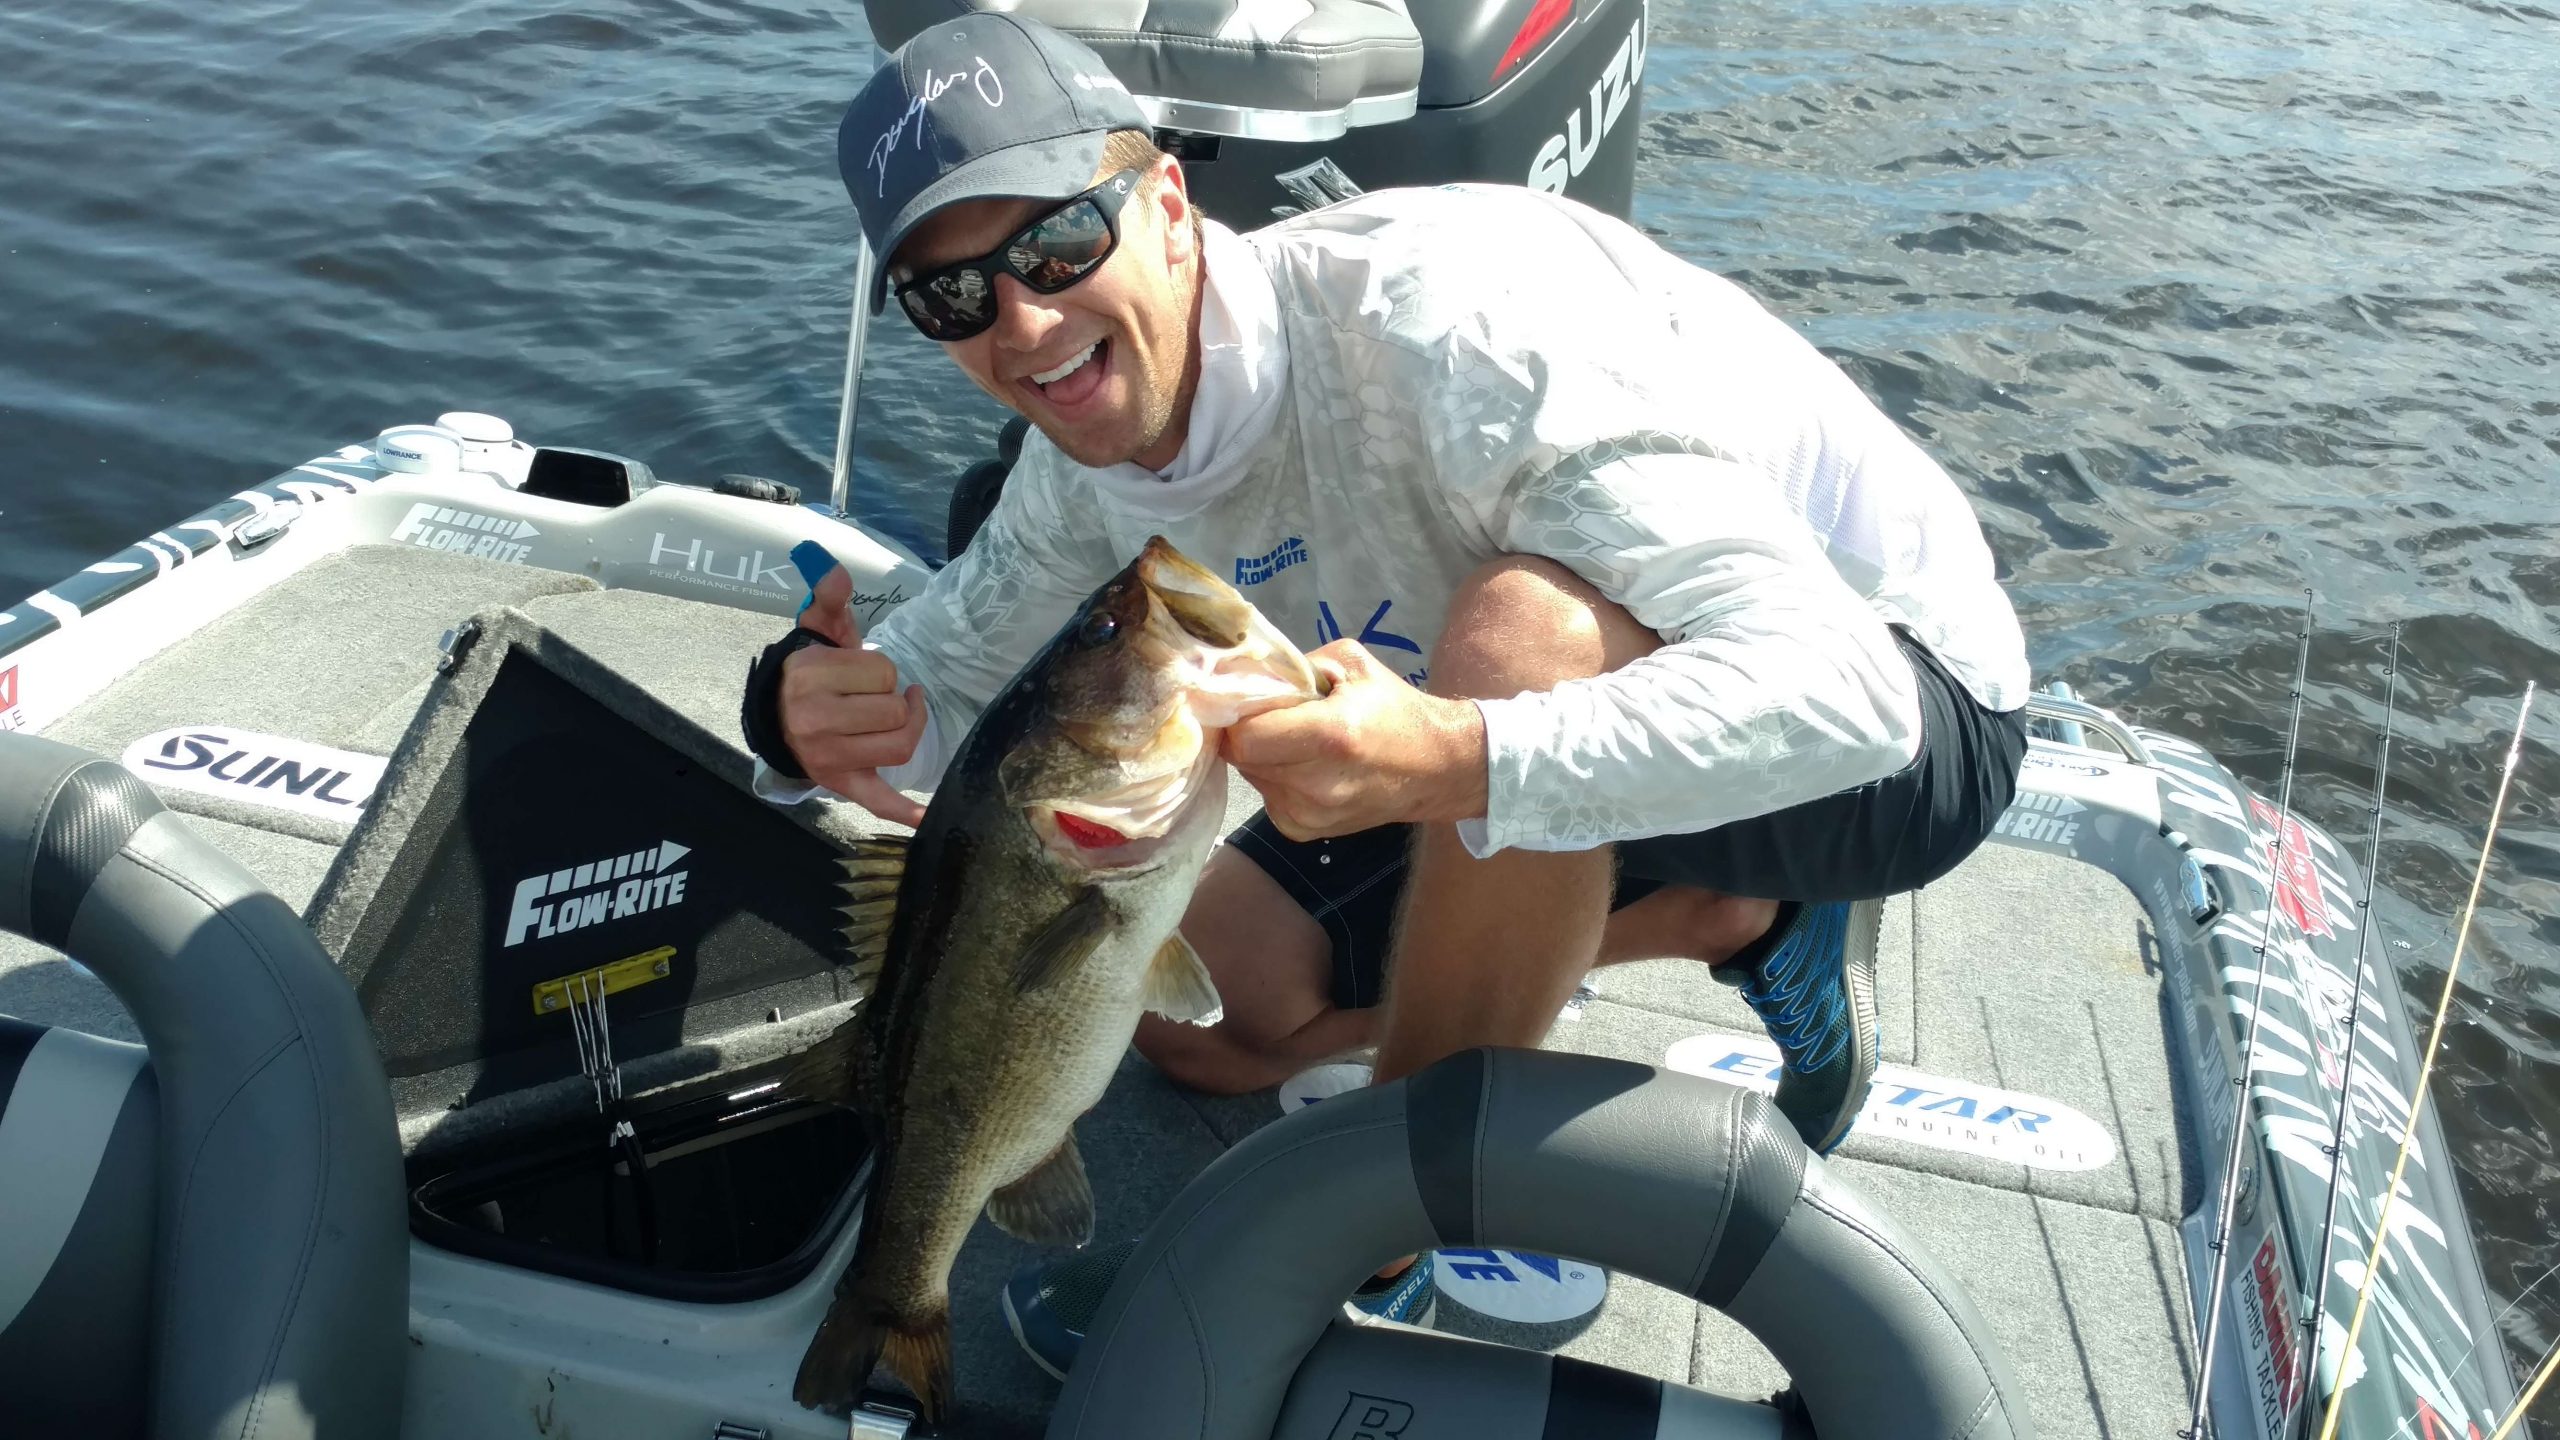 That's the smile we're looking for! Pipkens with a big 5 pounder! Finally landed a good one after a brief boating!